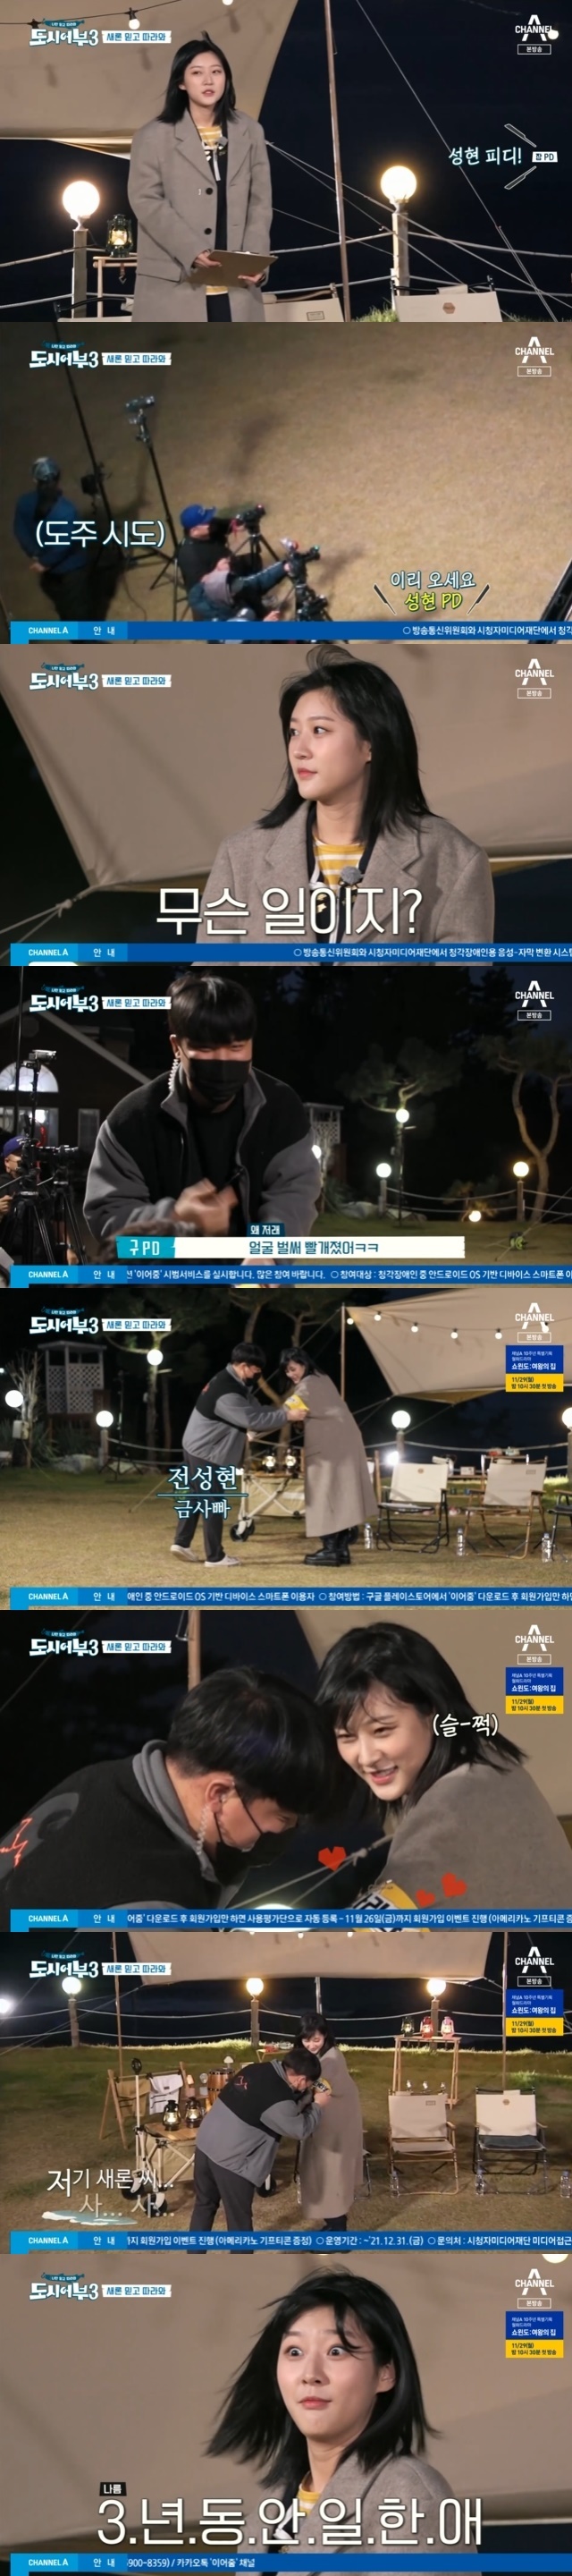 Kim Sae-ron smiled at the staff who were ashamed.In the 27th episode of Channel As entertainment Follow Me, Follow MeThe Fishermen and the City City Season 3 (hereinafter referred to as The The Fishermen and the City), which was broadcast on November 18th, Kim Sae-rons It Follows beauty was held in Uljin, Gyeongbuk.On this day, Kim Sae-ron was the first to come to work as an It Follows US protagonist and greeted the staff.Kim Sae-ron was the most performer, so he noticed that the staff cut their hair and naturally talked about their haircuts.A staff member of Kim Sae-ron filled me with his armband, and when he became super-close to Kim Sae-ron, his face turned red and showed a sense of embarrassment.Jang PD said, My face is already red. I work. I could not hide my smile.